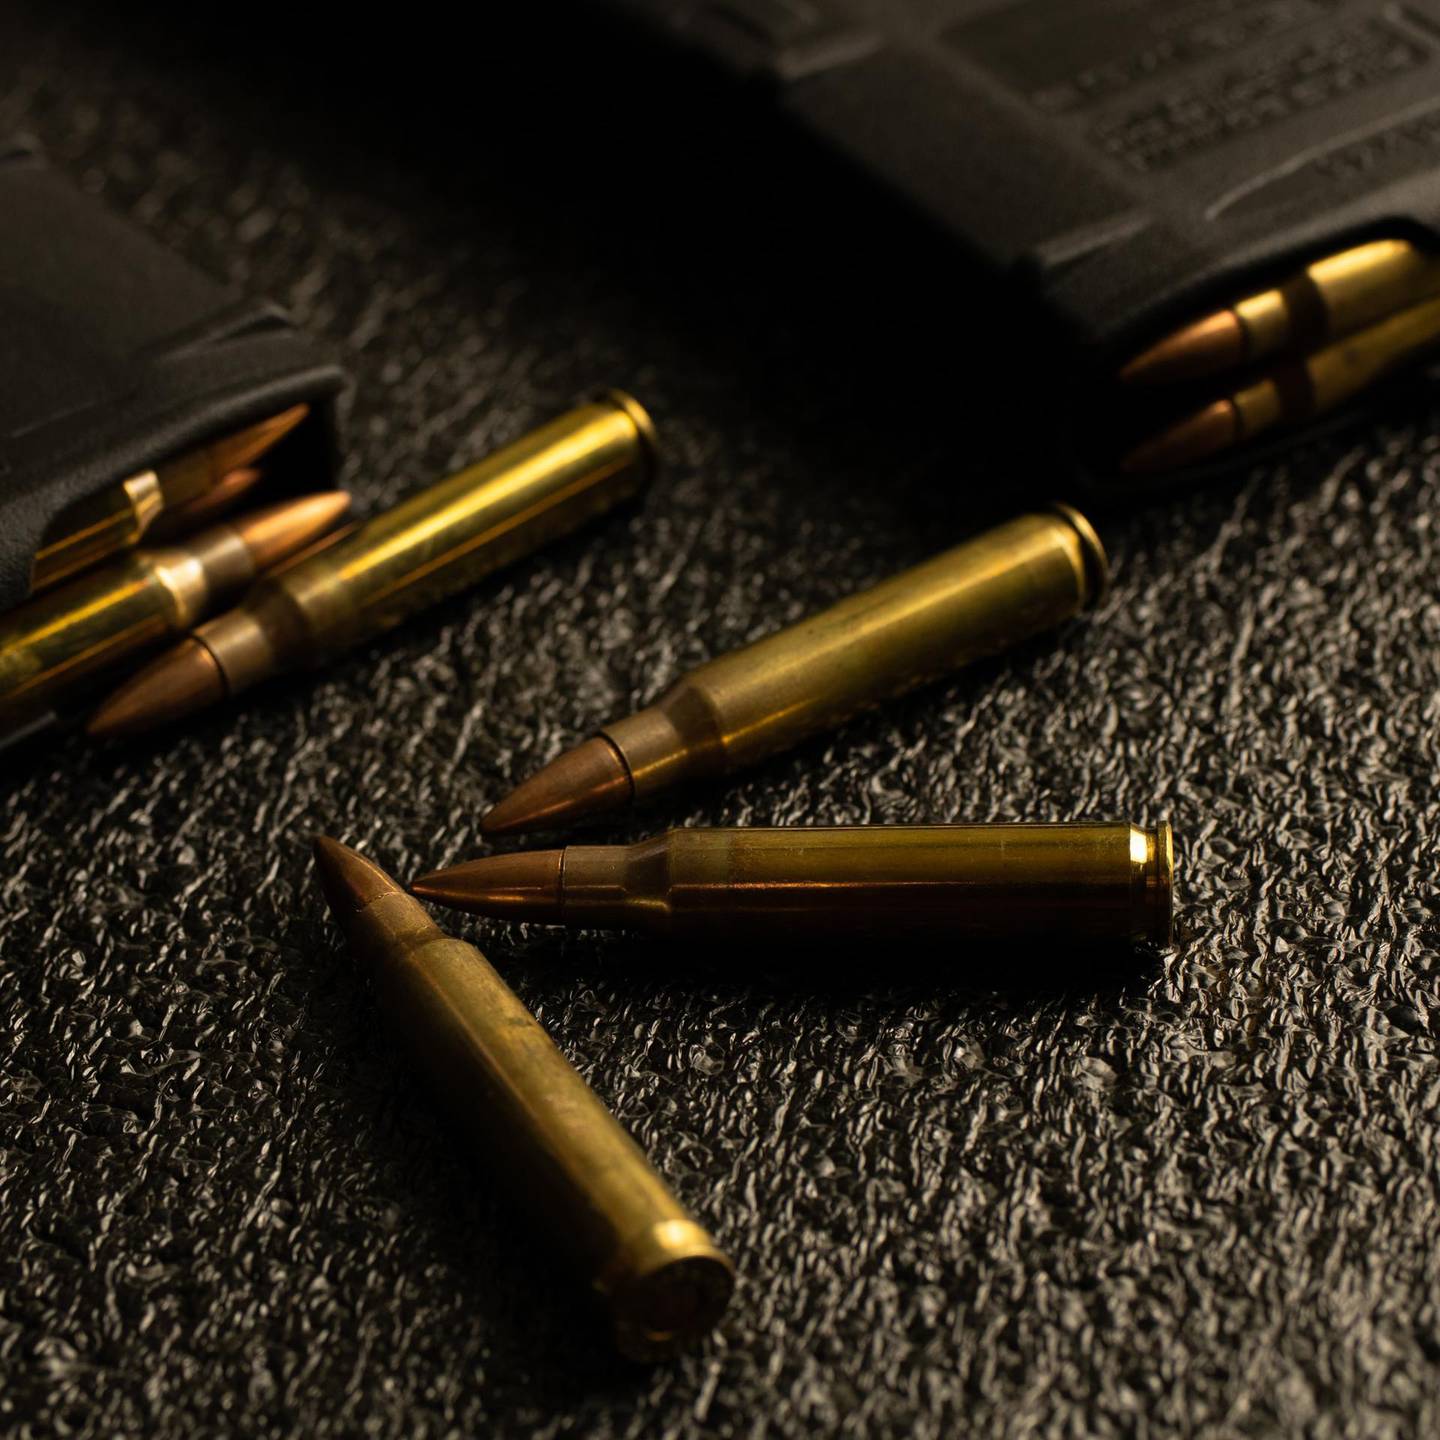 Soldiers would bite bullets while enduring pain. Unsplash